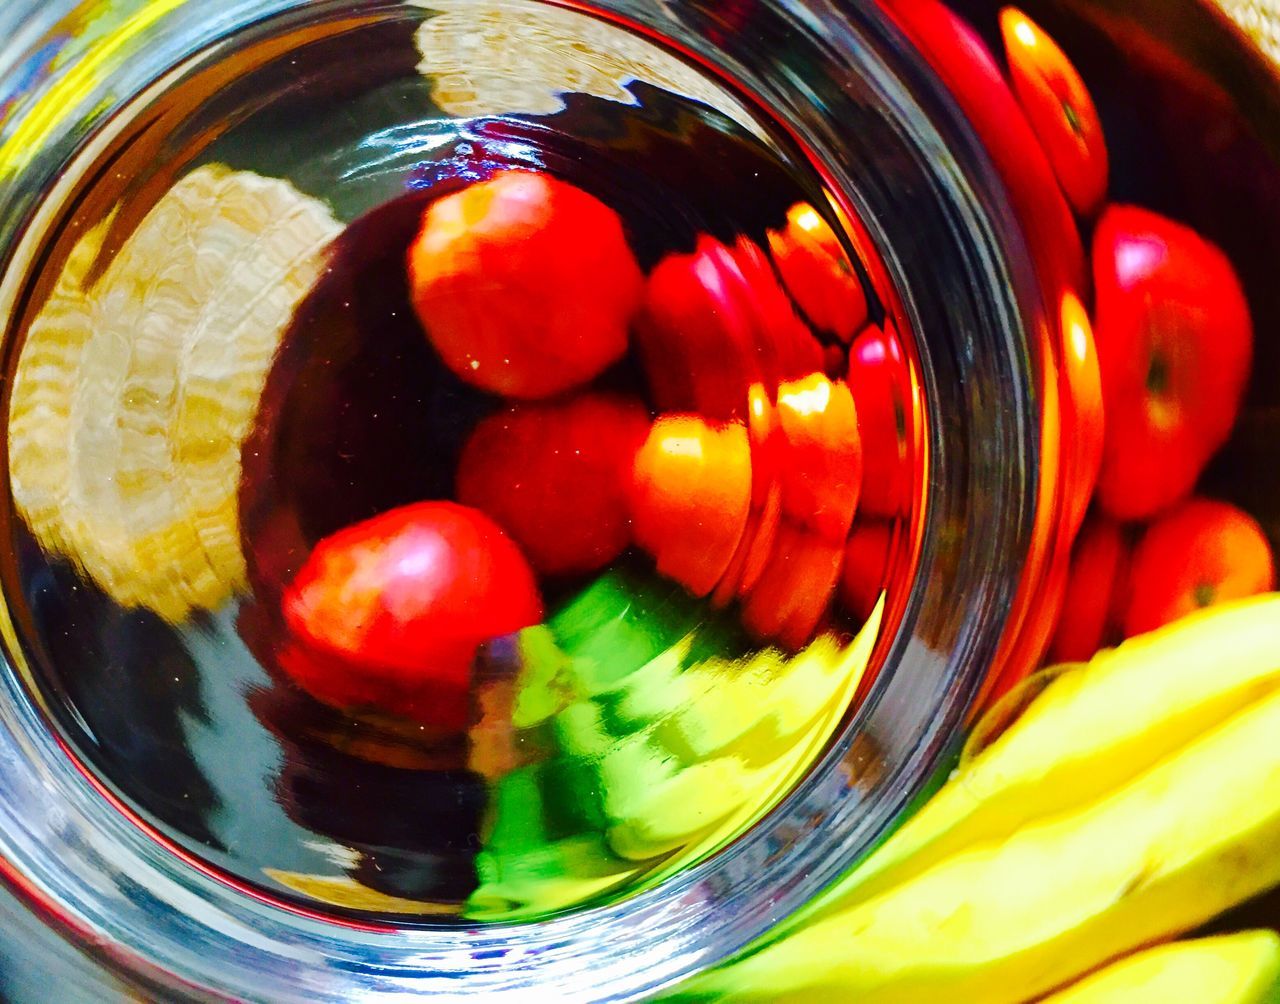 food and drink, close-up, food, multi colored, indoors, still life, directly above, container, sweet food, no people, healthy eating, glass - material, freshness, jar, red, fruit, sweet, candy, high angle view, glass, temptation